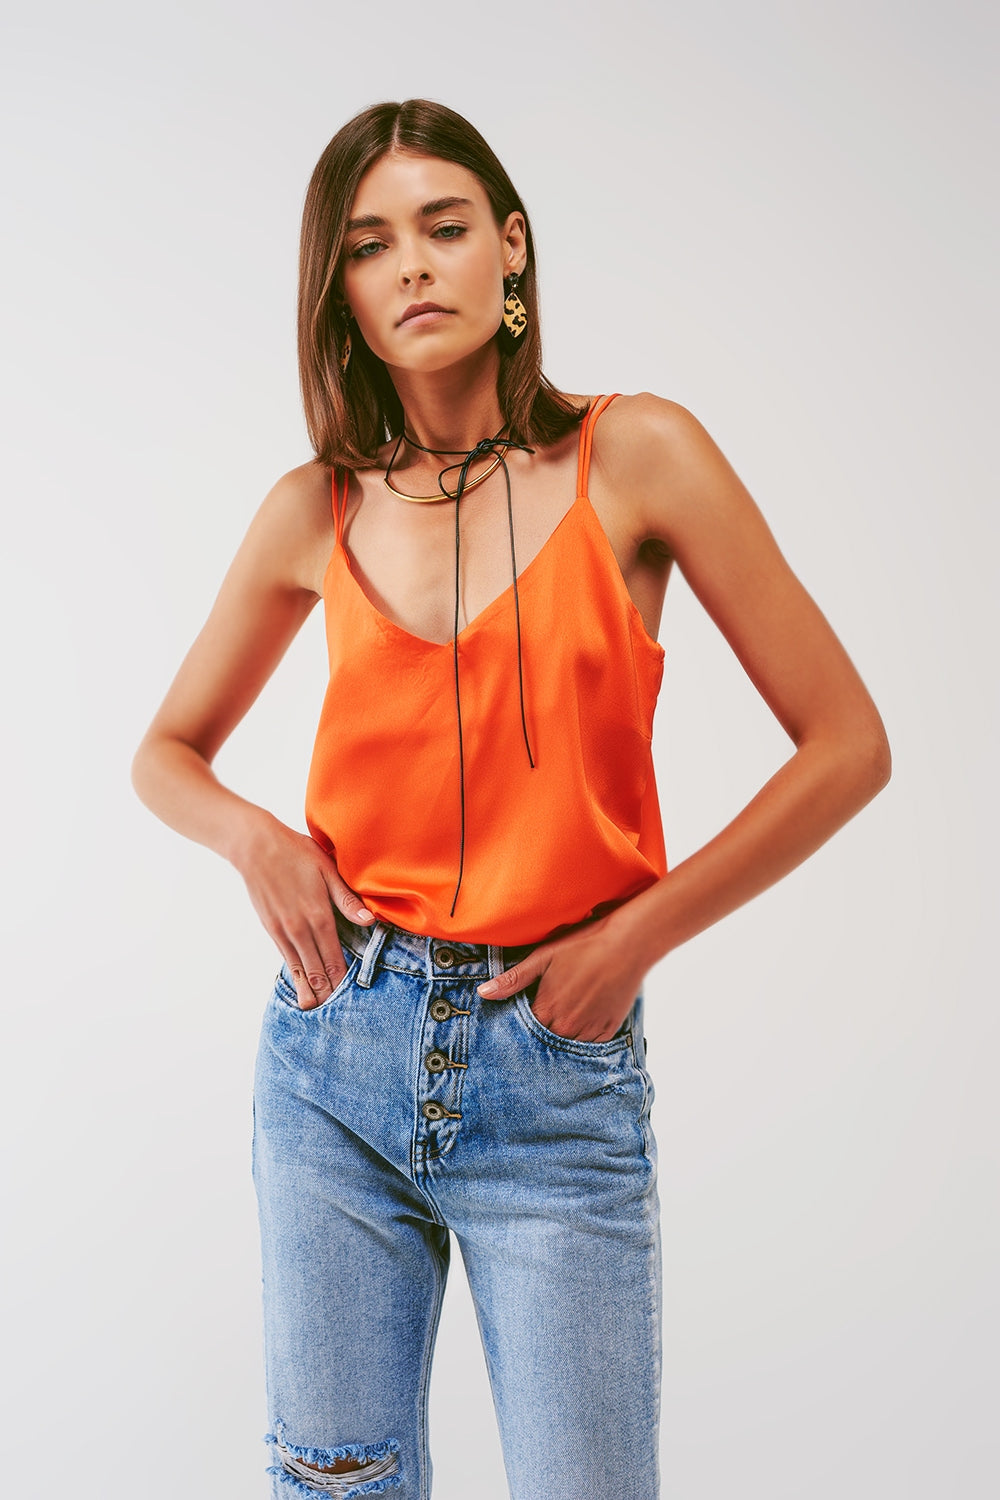 Q2 Cropped Shirt with Spaghetti Straps in Orange